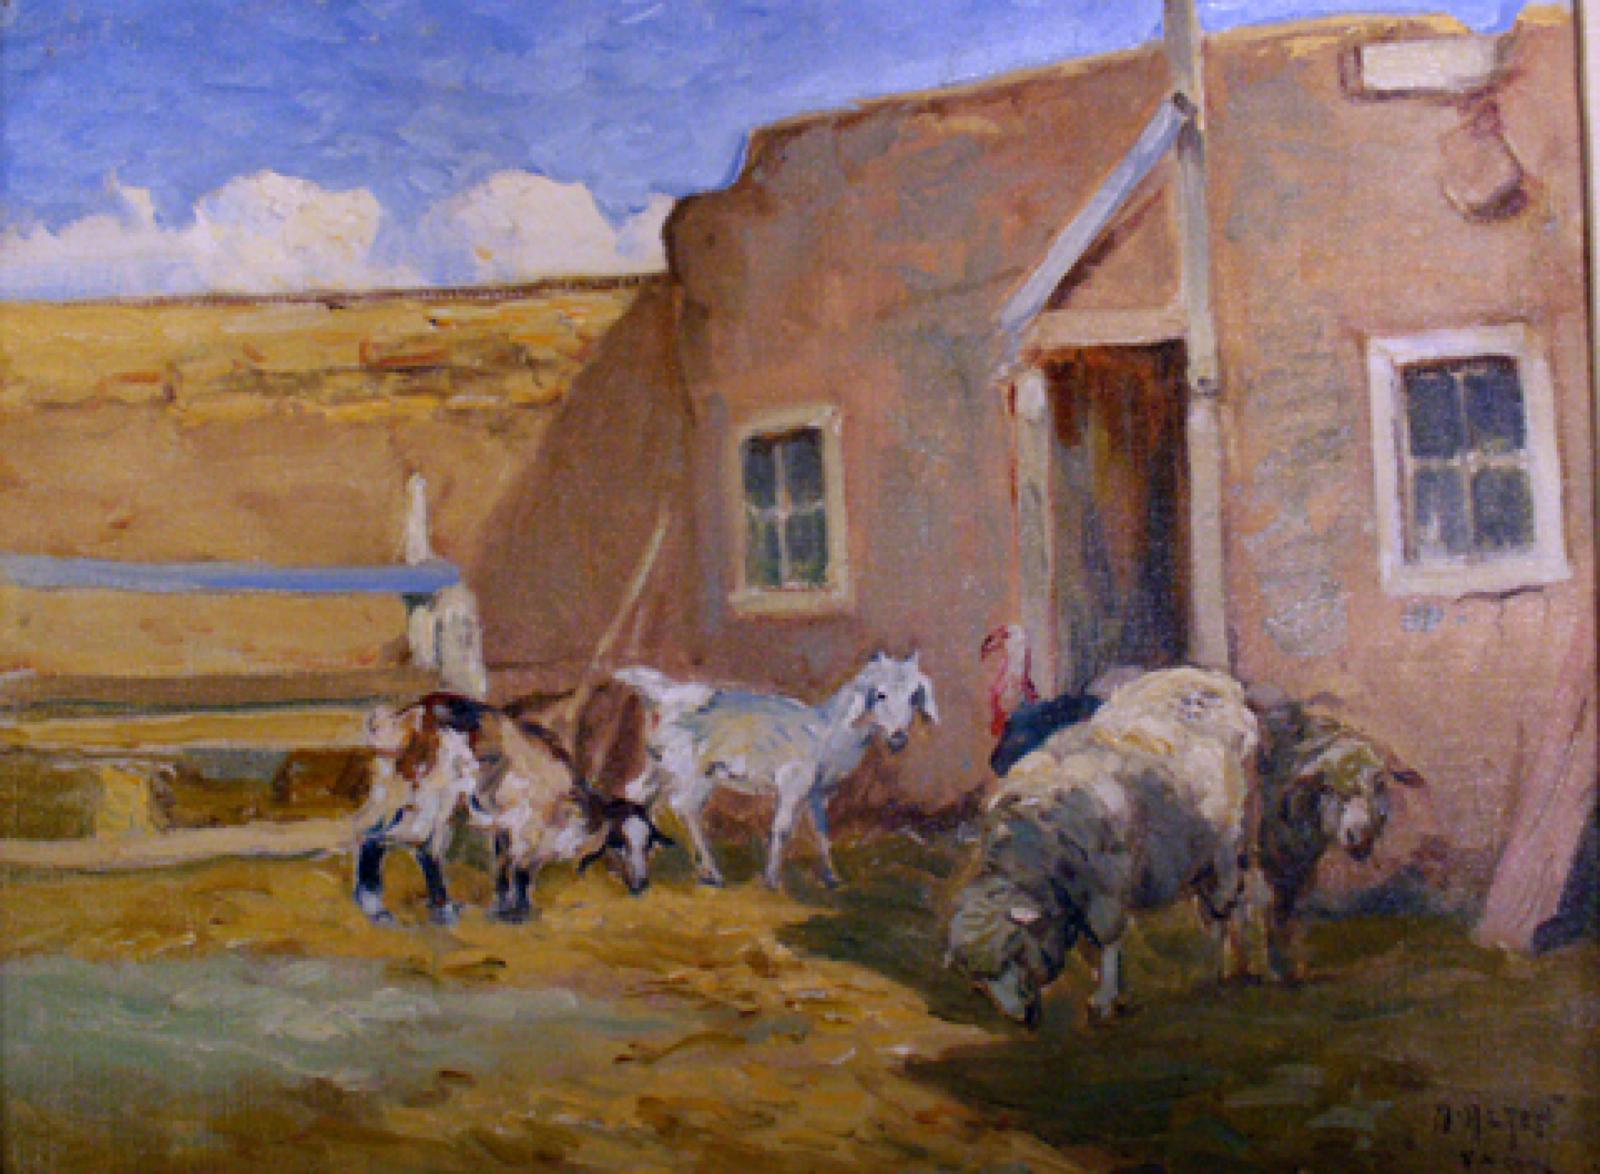 Small barnyard scene with animals including sheep, goats and a turkey.